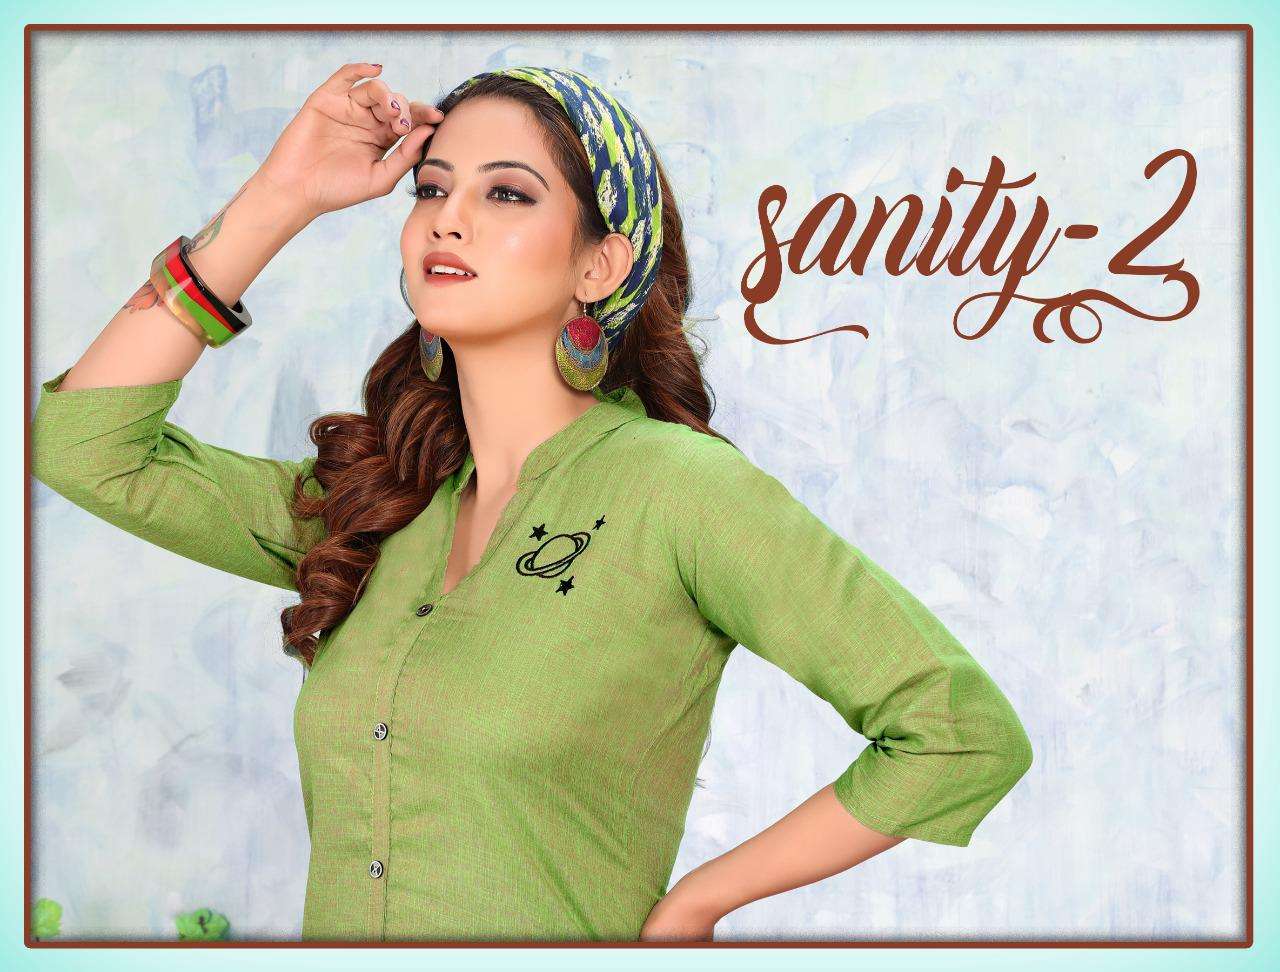 sanity vol.2 by trendy heavy rayon short top Catalog Collection Wholesaler Lowest Best Price In Ahmedabad Surat Chennai India Uk Usa Malaysia Singapore Canada Australia